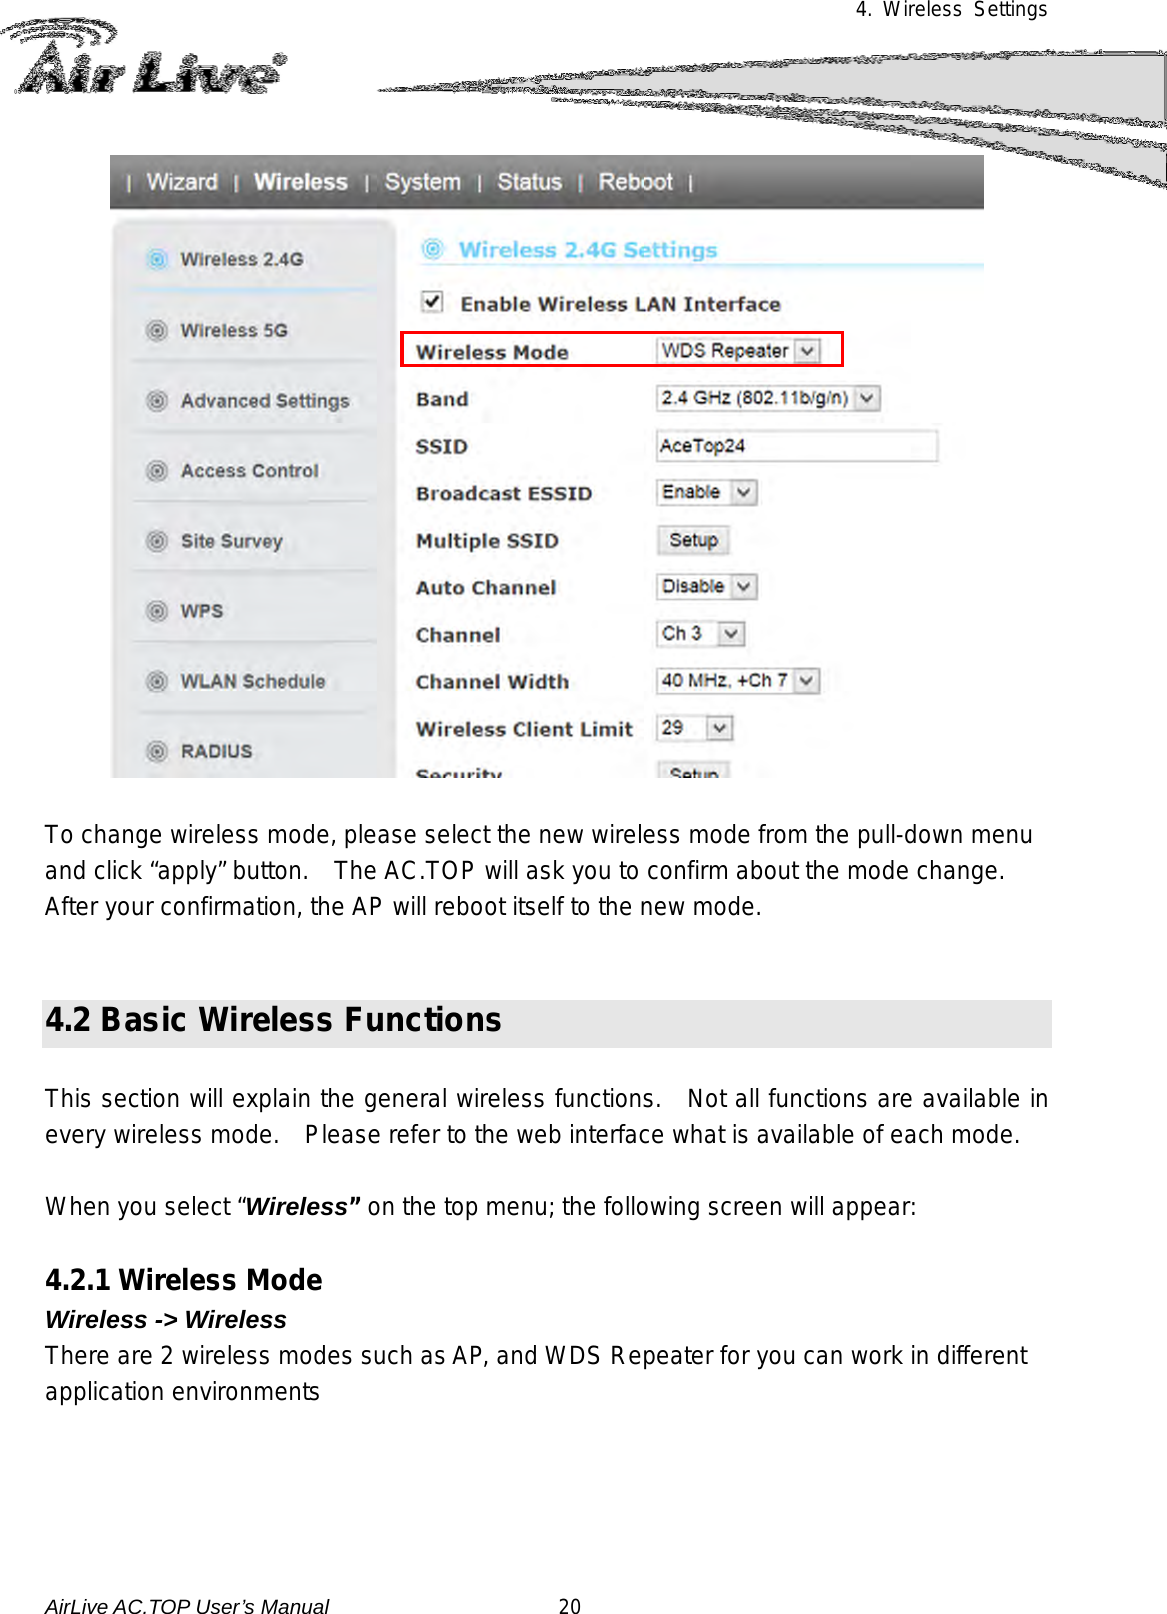 4. Wireless Settings    To change wireless mode, please select the new wireless mode from the pull-down menu and click “apply” button.  The AC.TOP will ask you to confirm about the mode change.   After your confirmation, the AP will reboot itself to the new mode.     4.2 Basic Wireless Functions  This section will explain the general wireless functions.  Not all functions are available in every wireless mode.    Please refer to the web interface what is available of each mode.   When you select “Wireless” on the top menu; the following screen will appear:    4.2.1 Wireless Mode   Wireless -&gt; Wireless There are 2 wireless modes such as AP, and WDS Repeater for you can work in different application environments AirLive AC.TOP User’s Manual                      20 